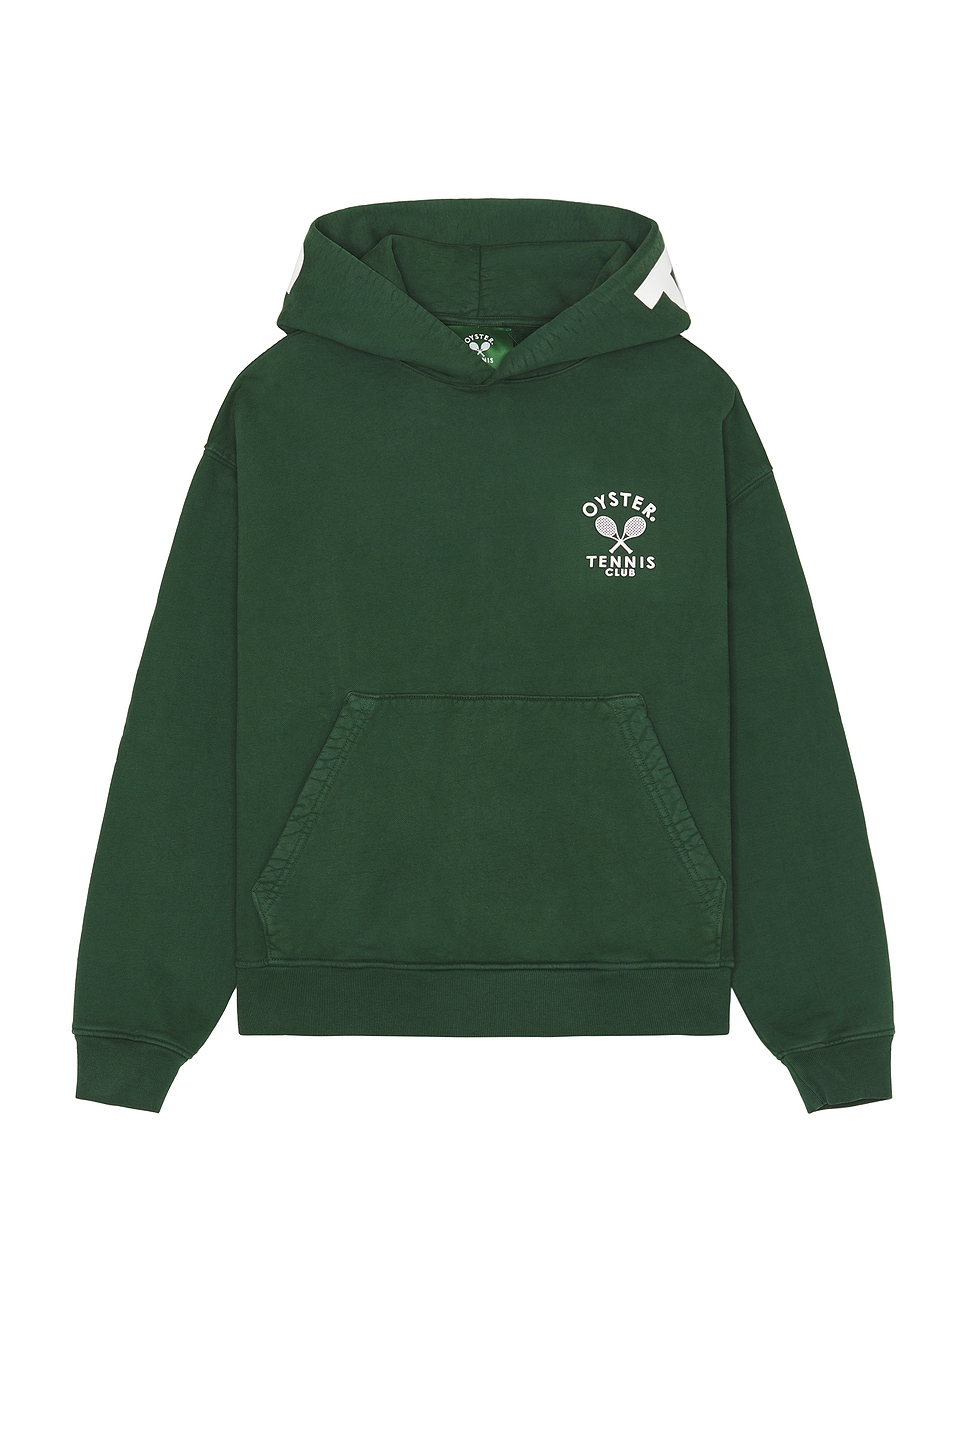 Image 1 of Oyster Tennis Club Pullover Hoodie in Green